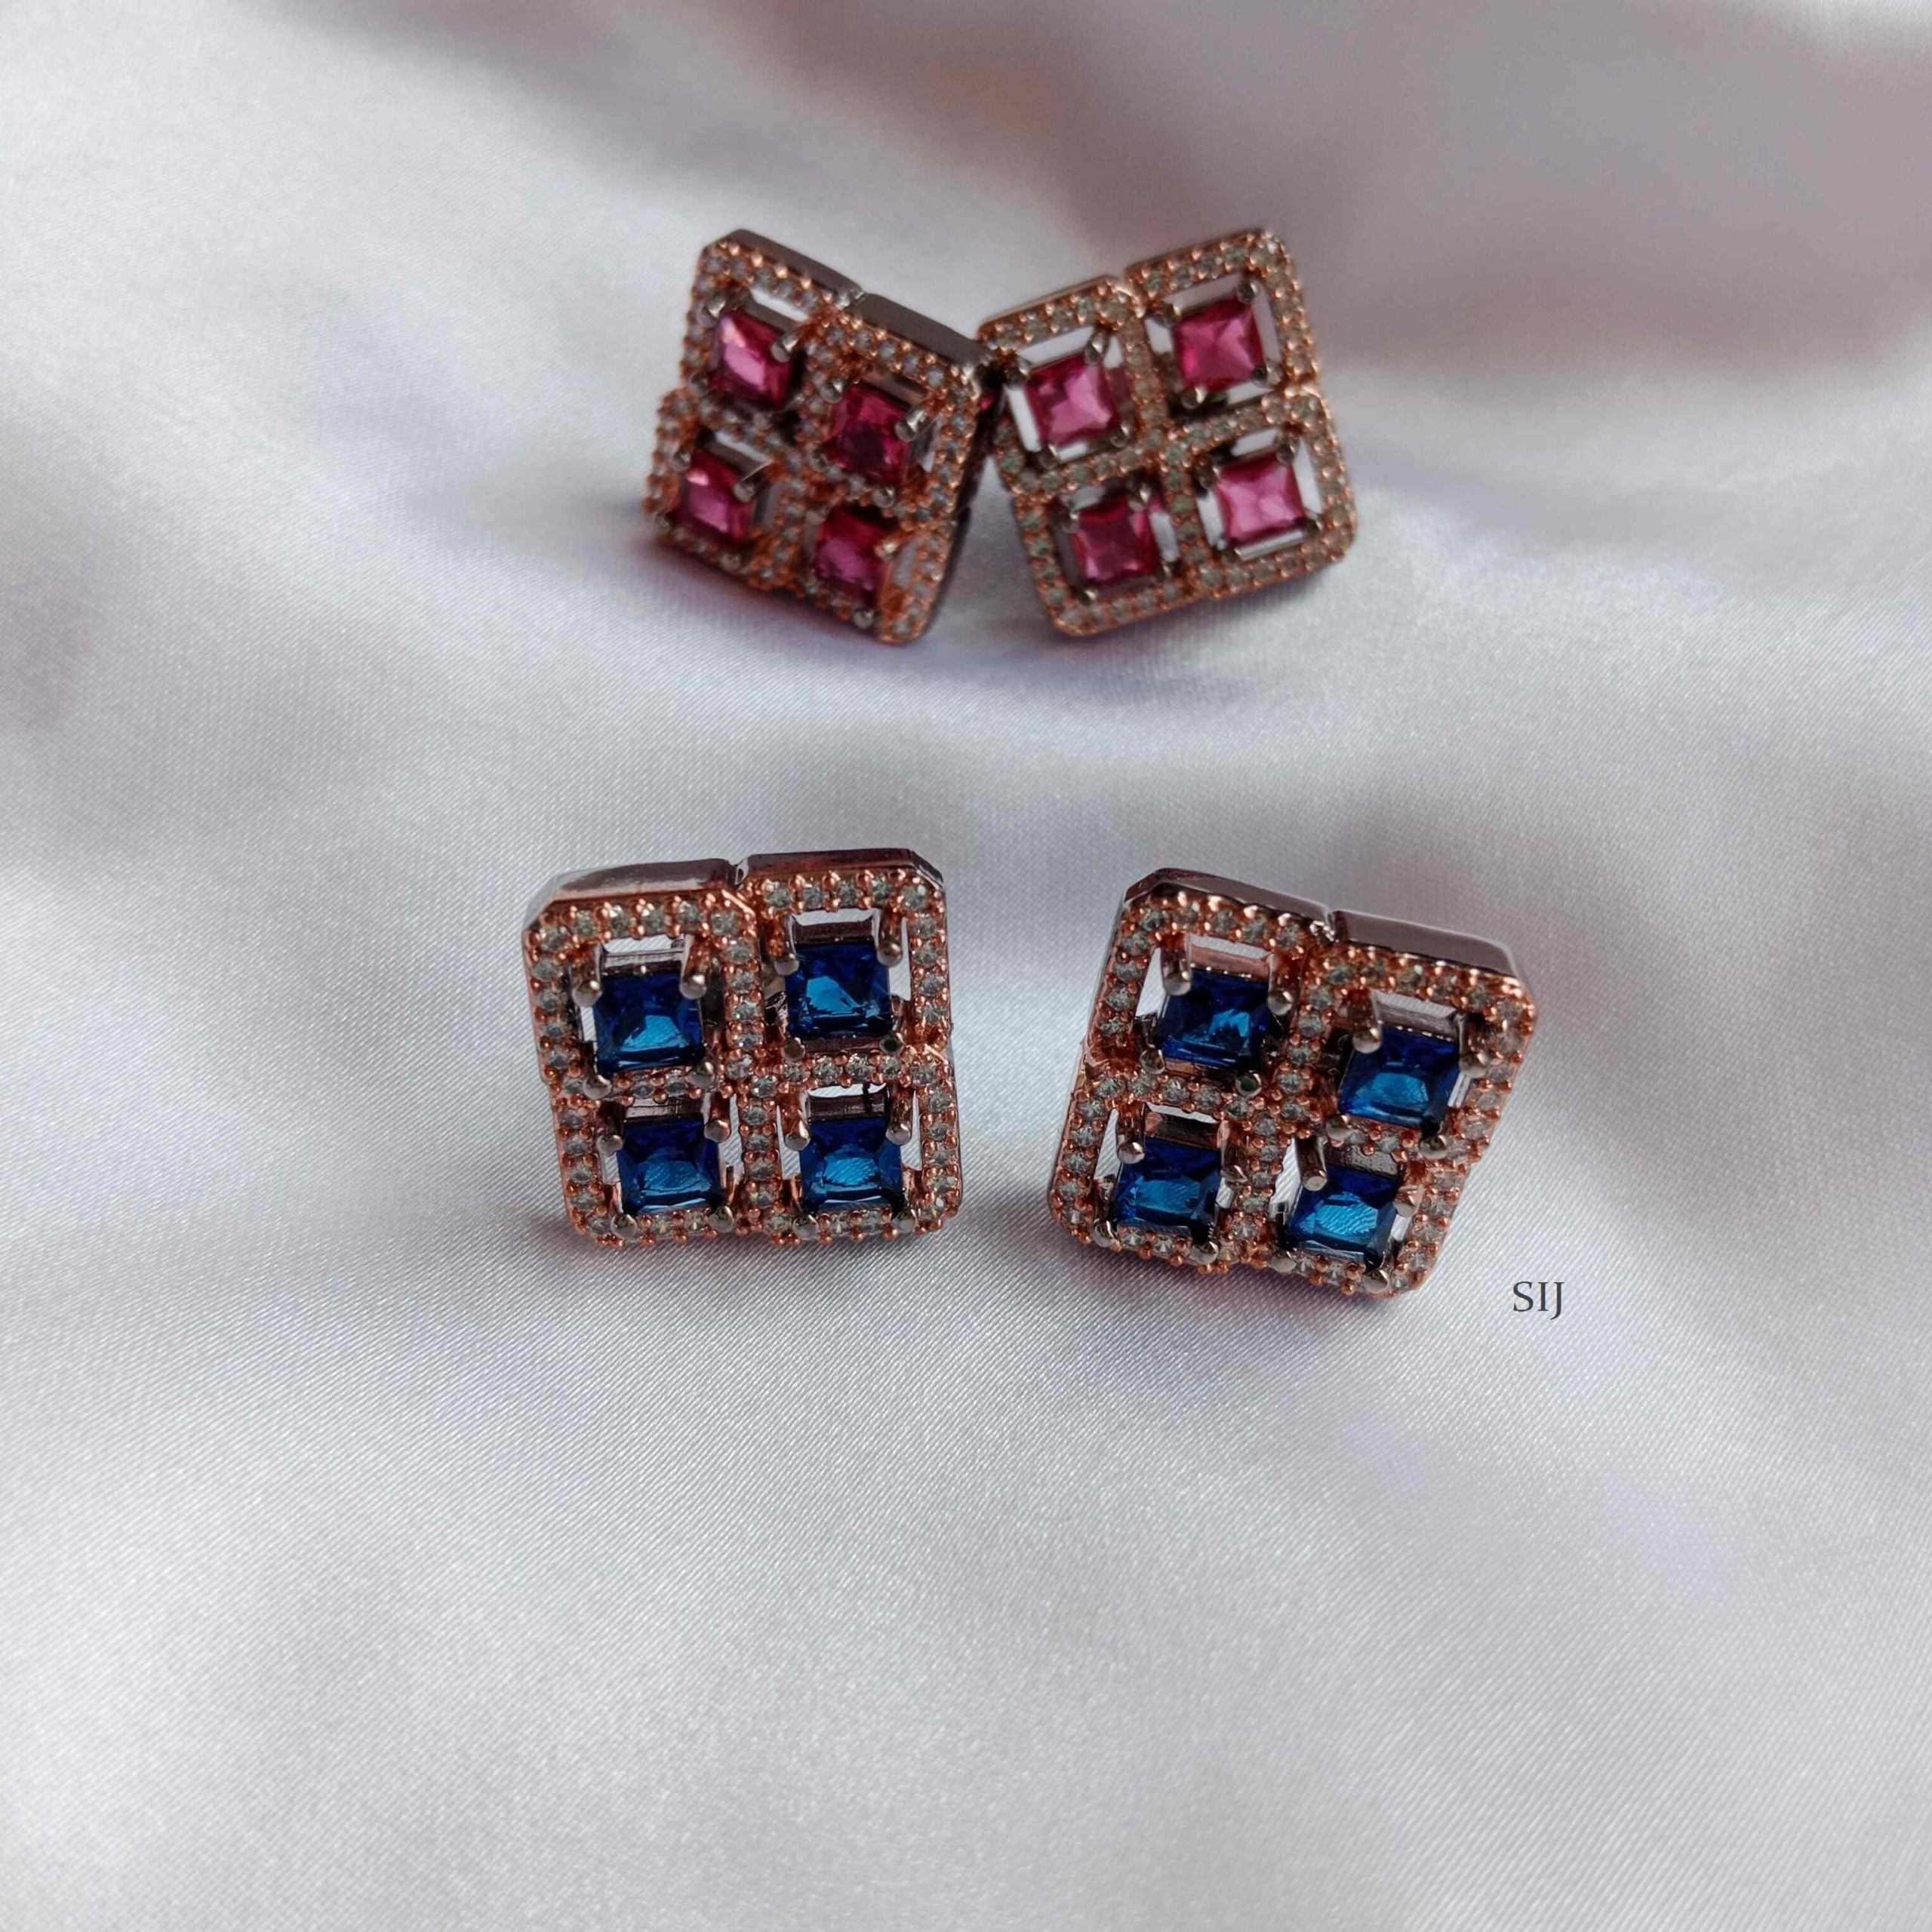 Imitation Red / Blue AD Stones Square Earrings